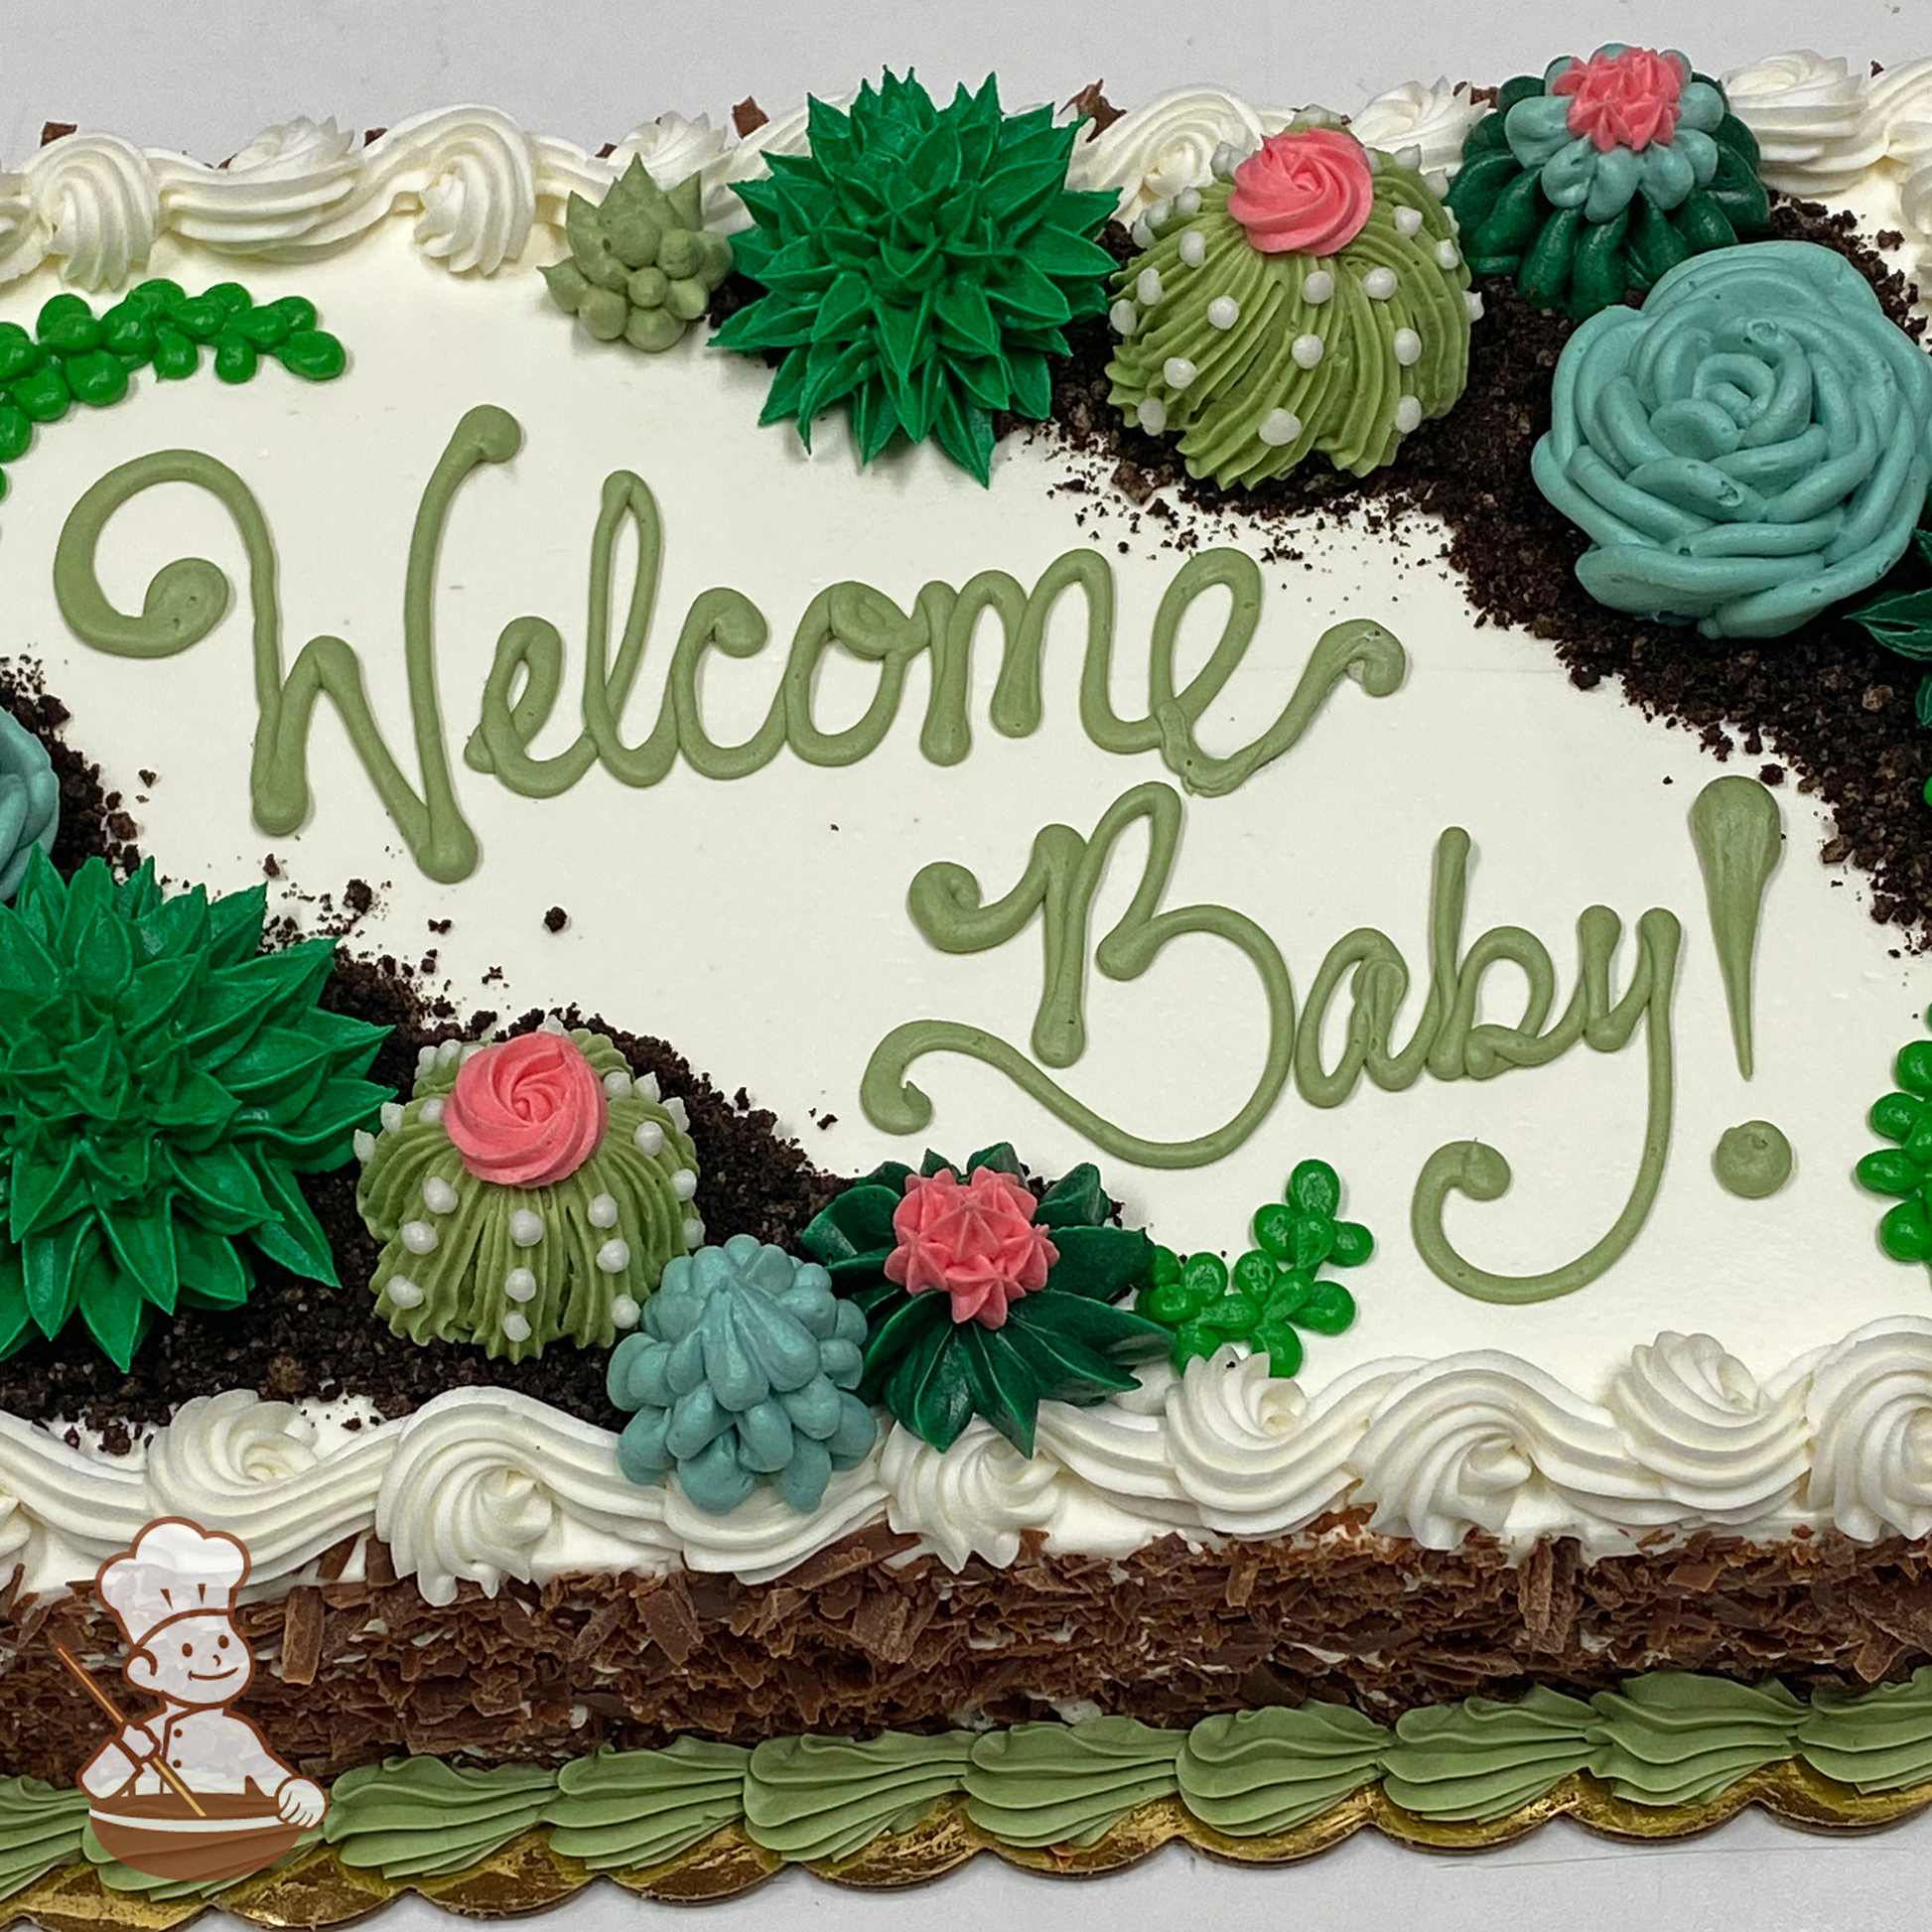 Baby shower sheet cake with buttercream succuclent plants and cacti and edible dirt crumbs.